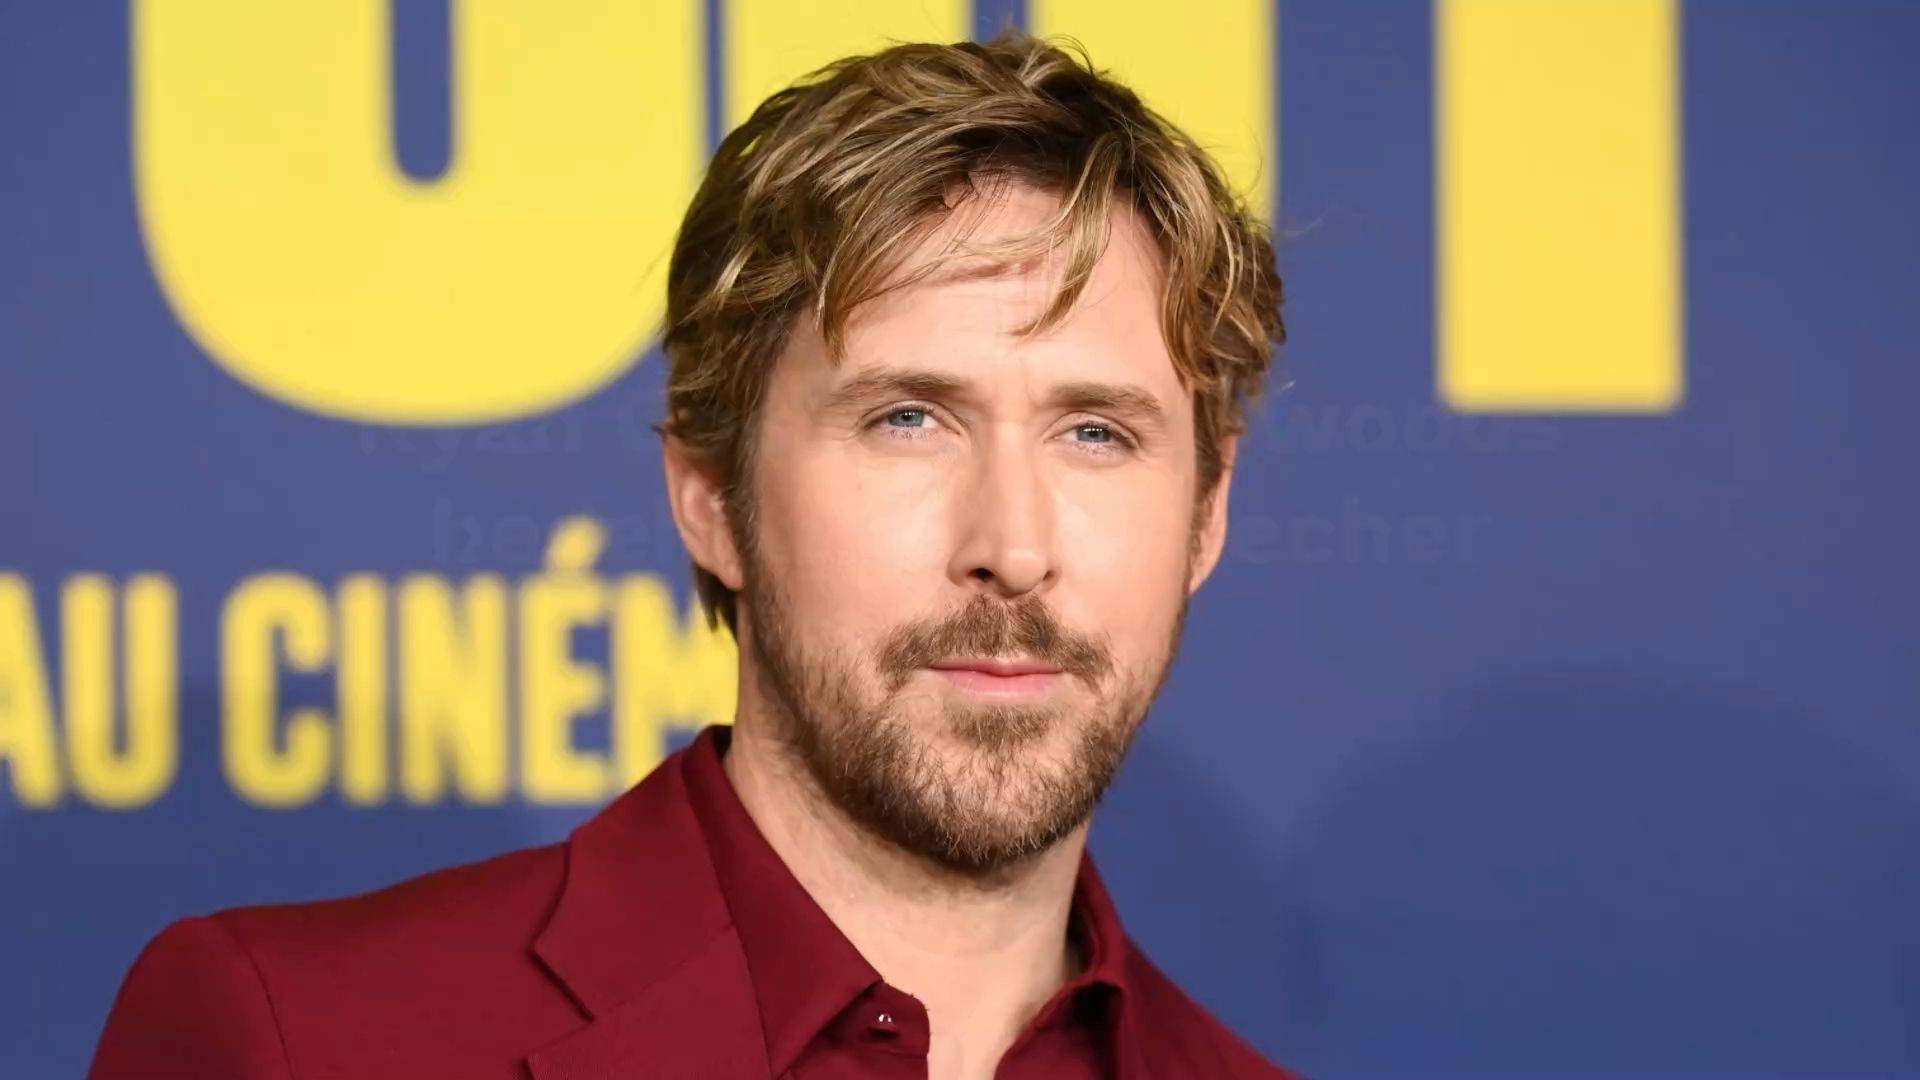 Ryan Gosling: This is the list of his exes